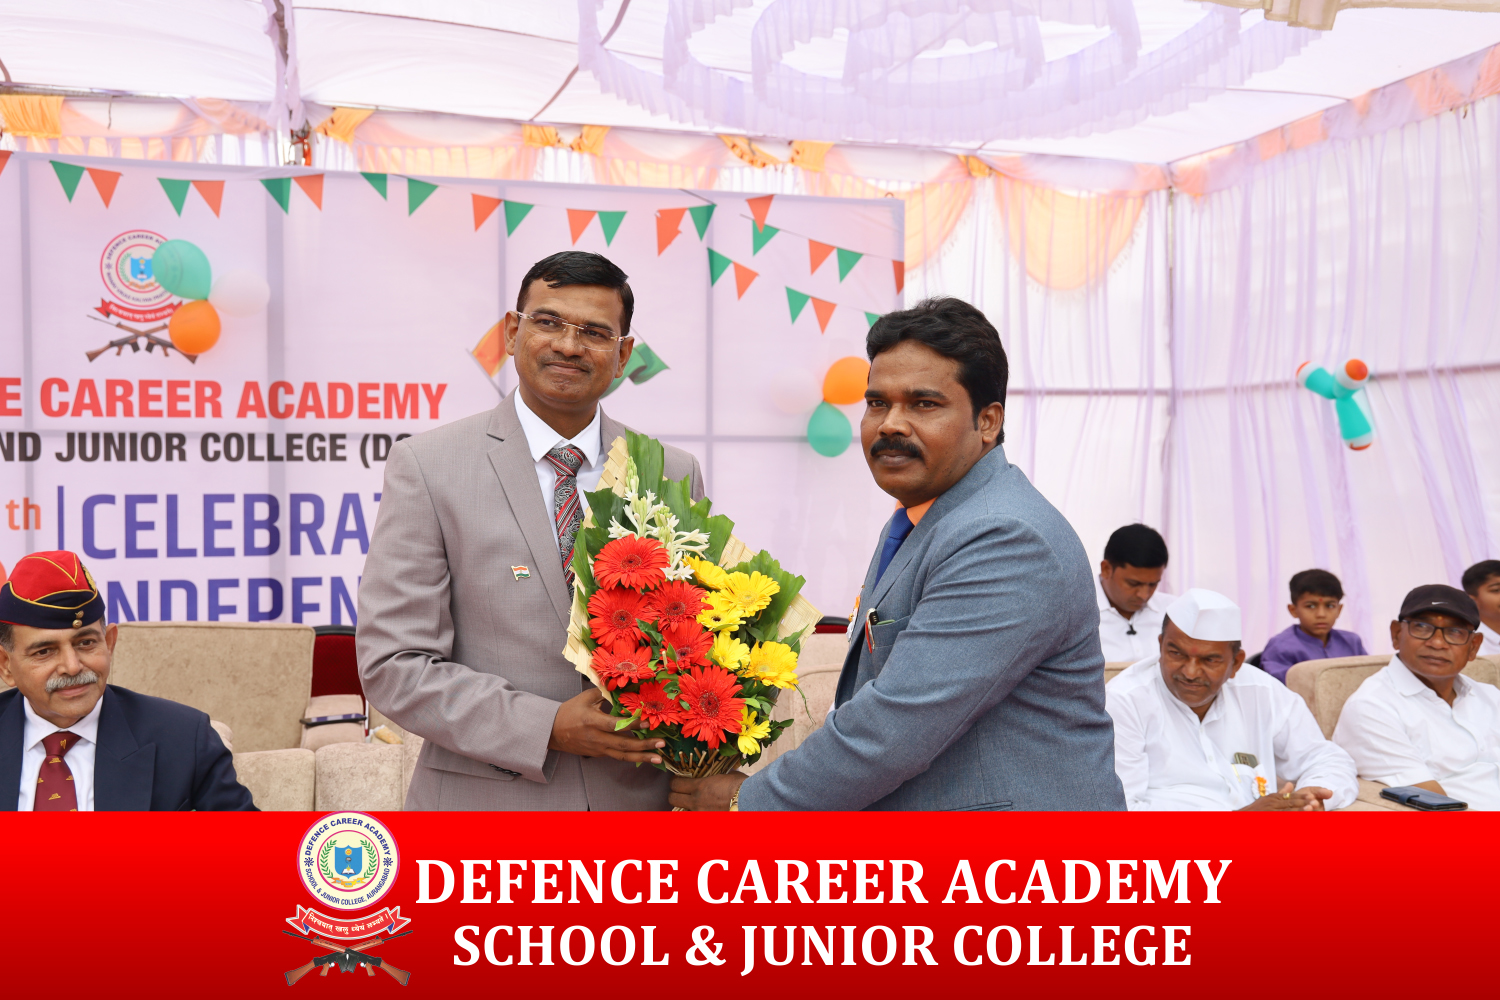 DCA-In-Aurangabad-Branch-for-Best-NDA-Exam-Preparation-Top-NDA-Coaching-Our-Faculties-and-Study-Materials-are-up-to-date-as-per-NDA-Examination